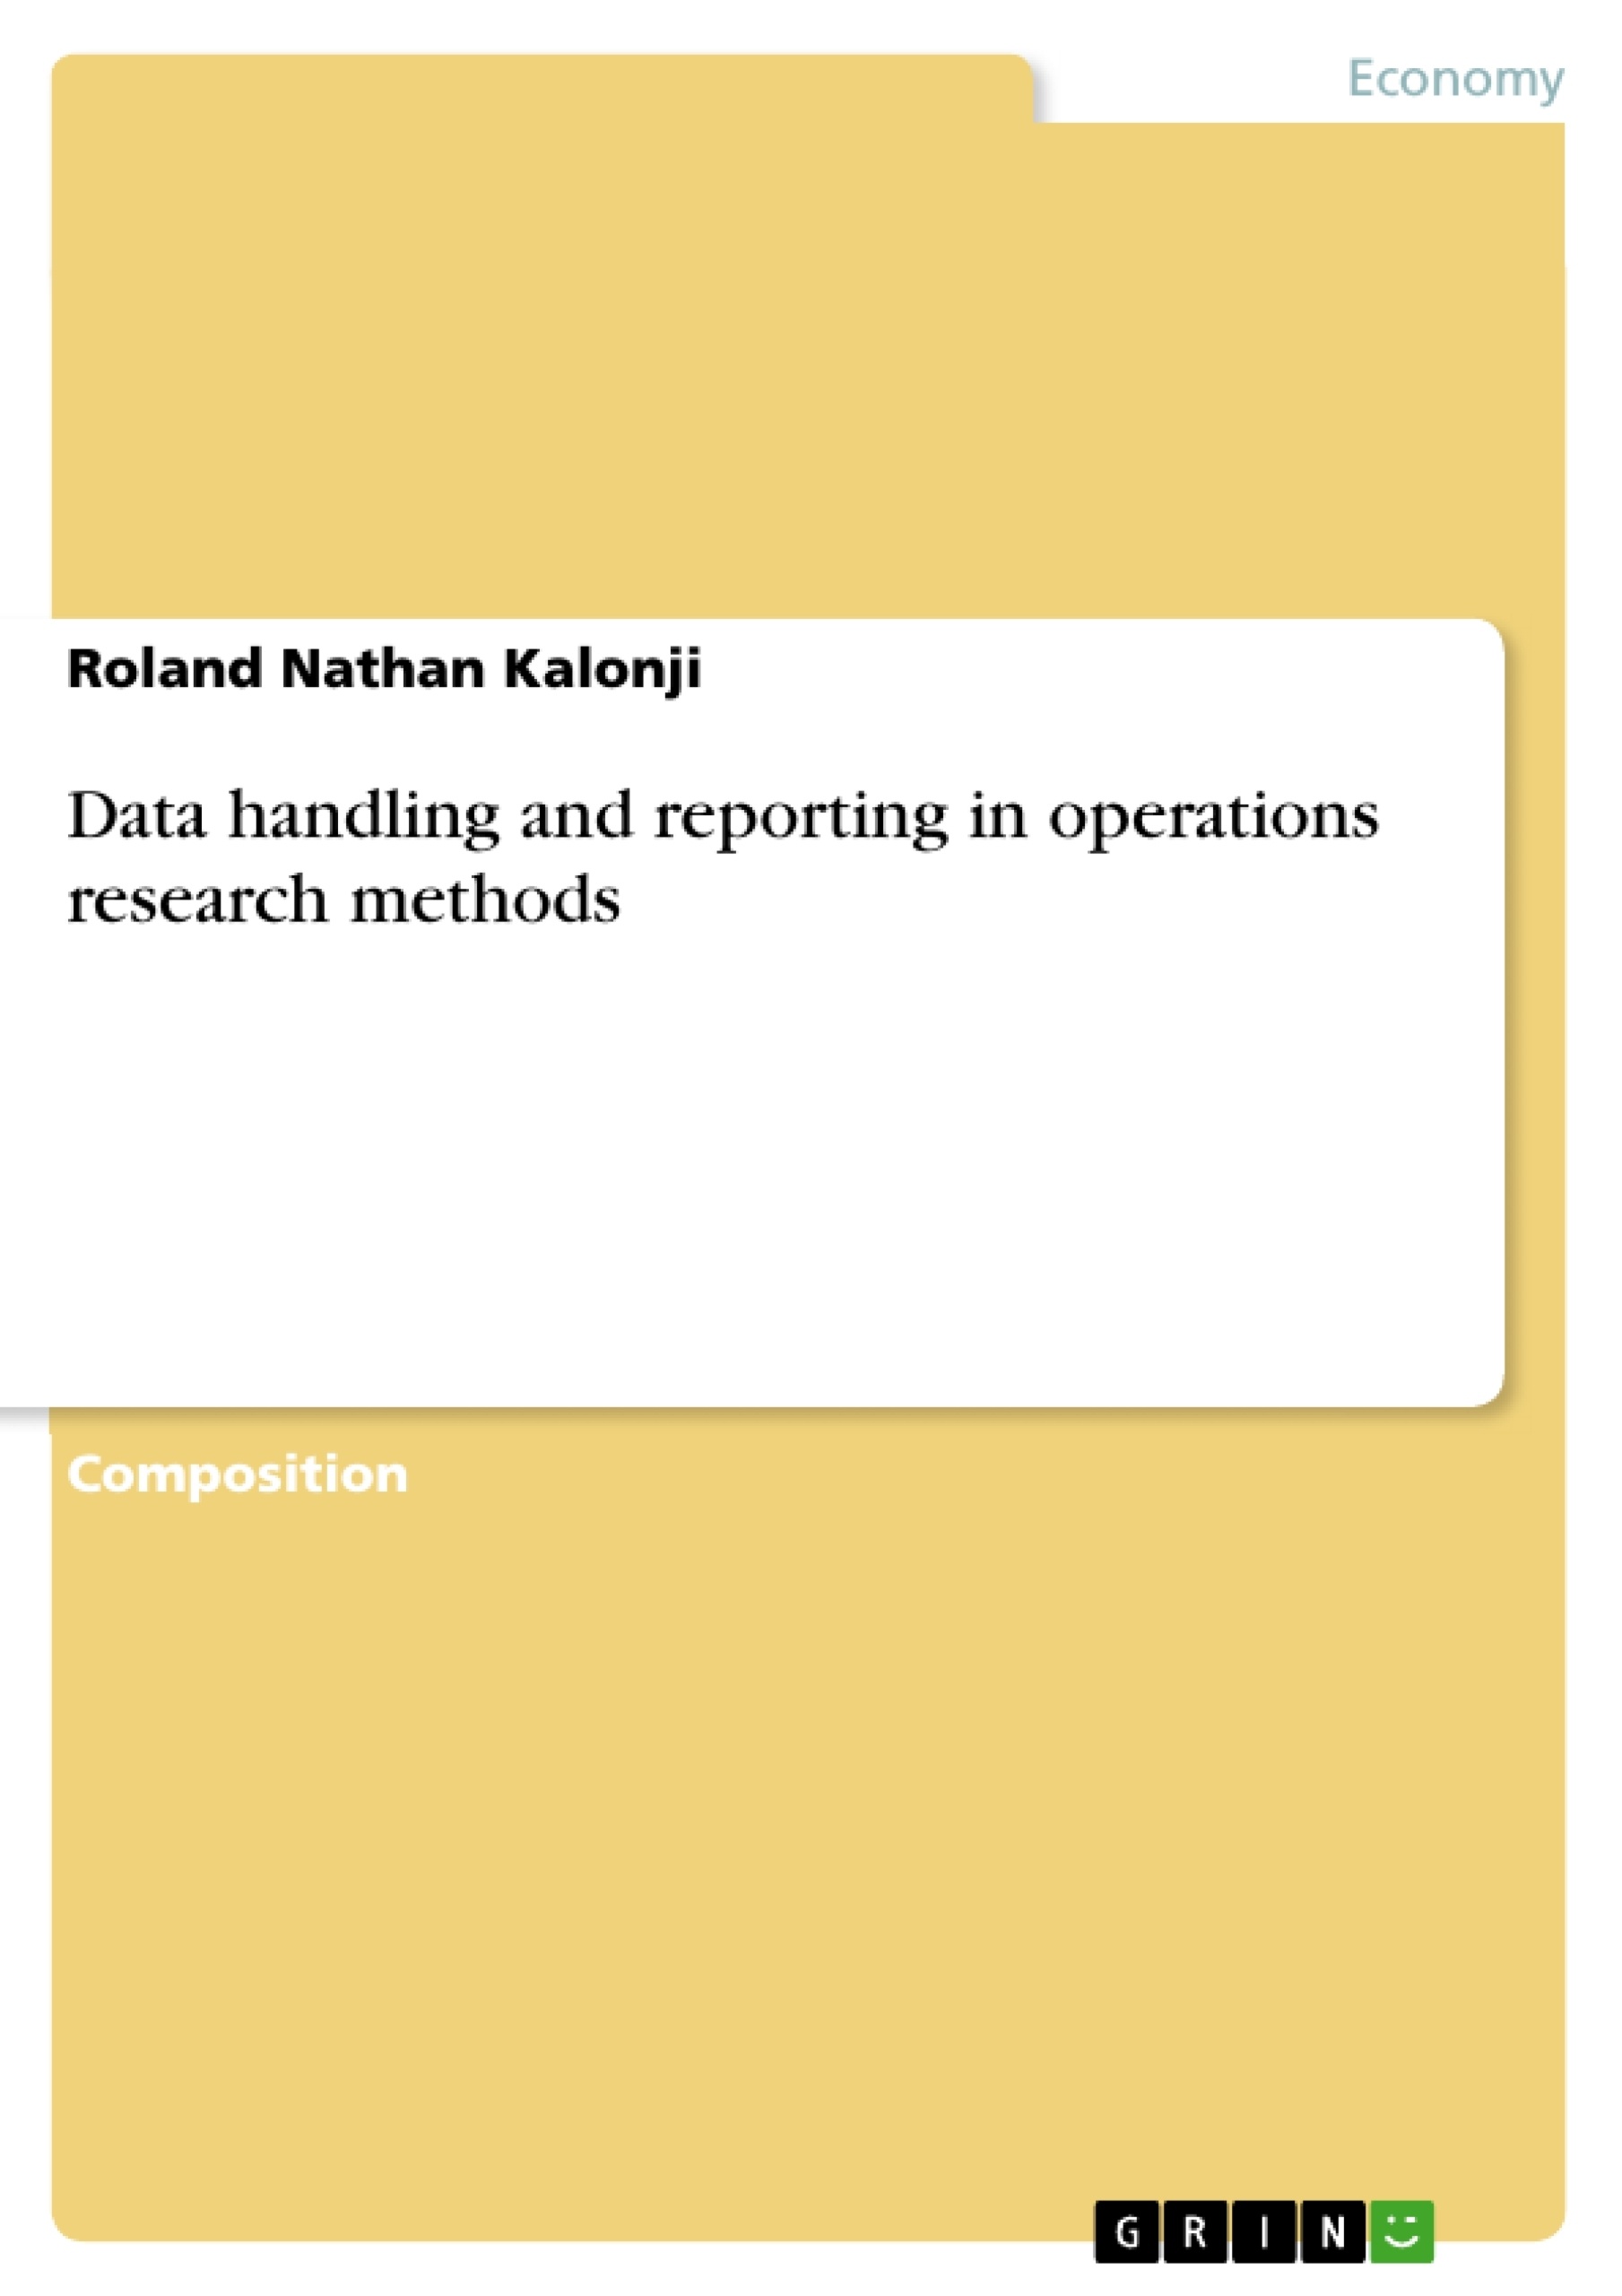 Título: Data handling and reporting in operations research methods